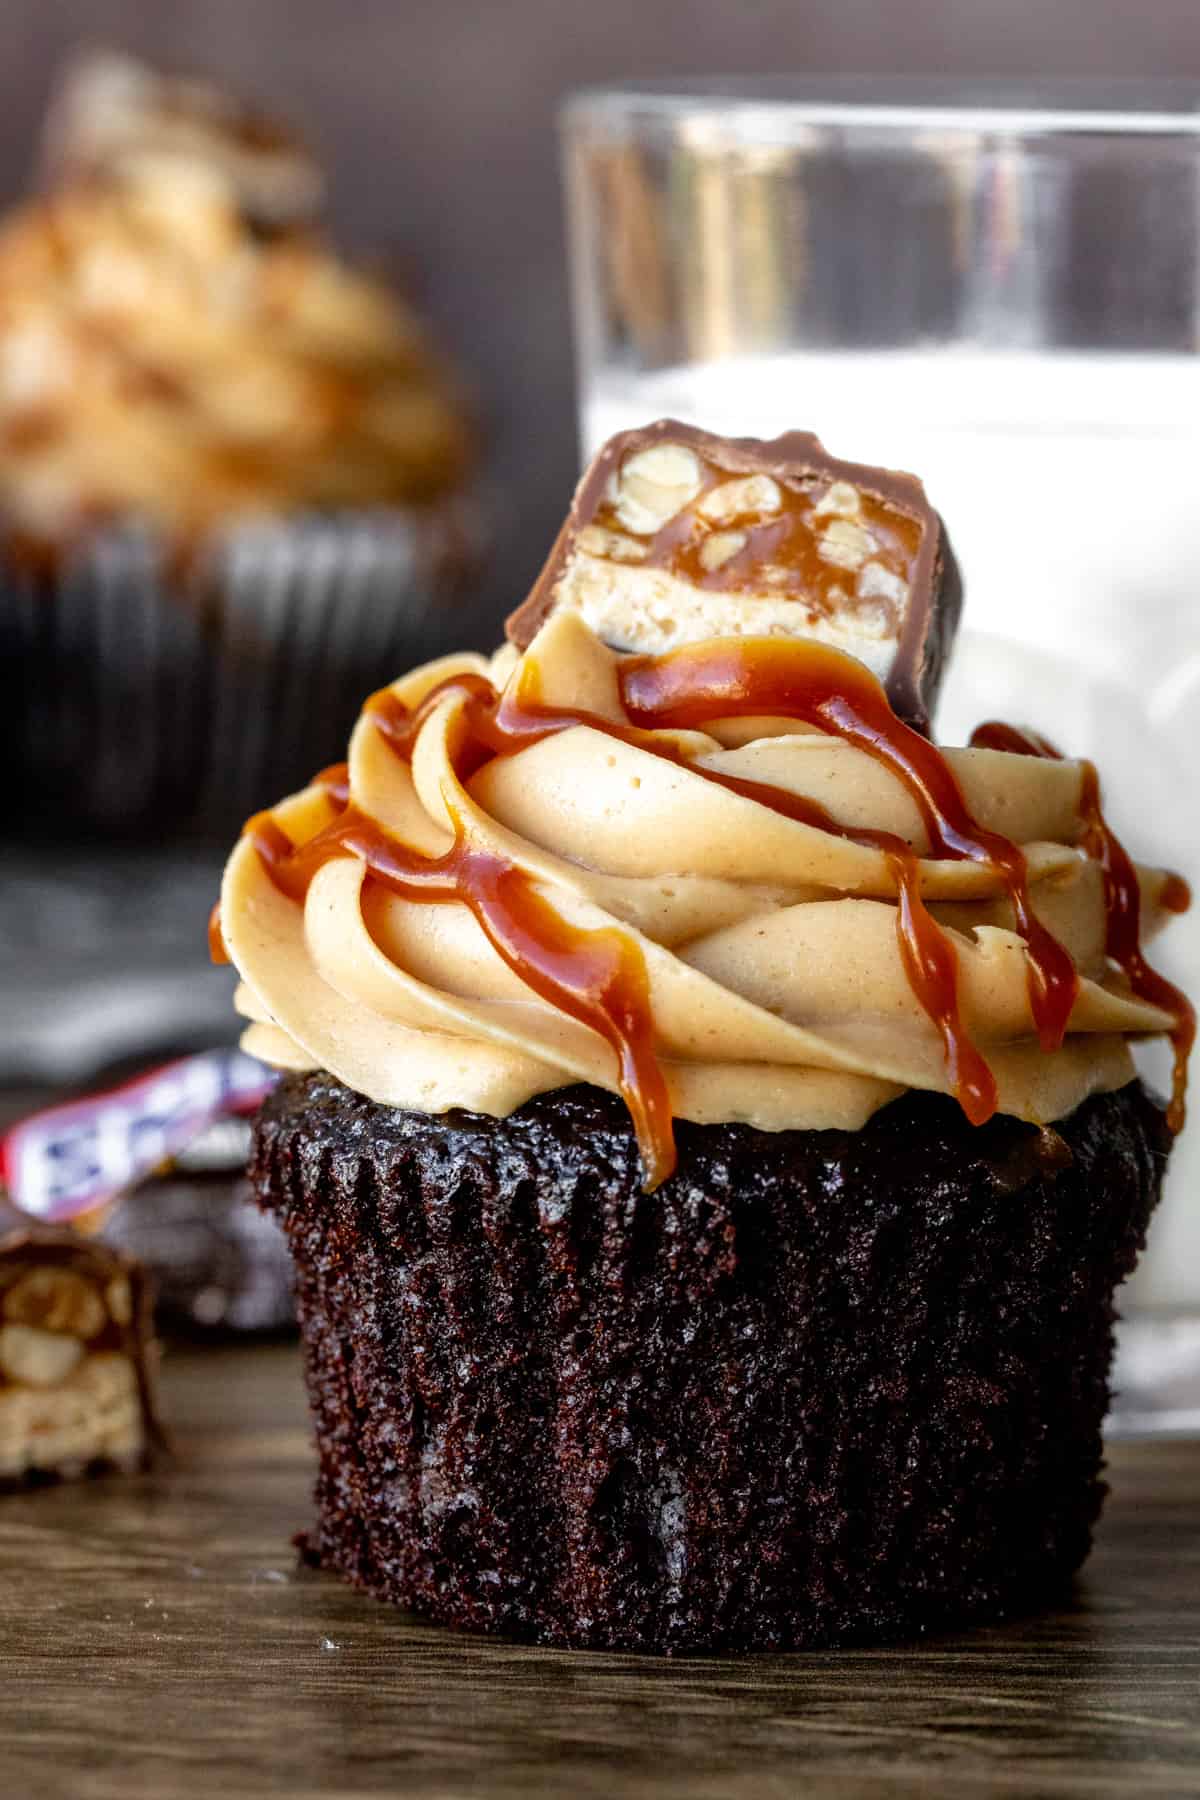 Snickers cupcakes with glass of milk